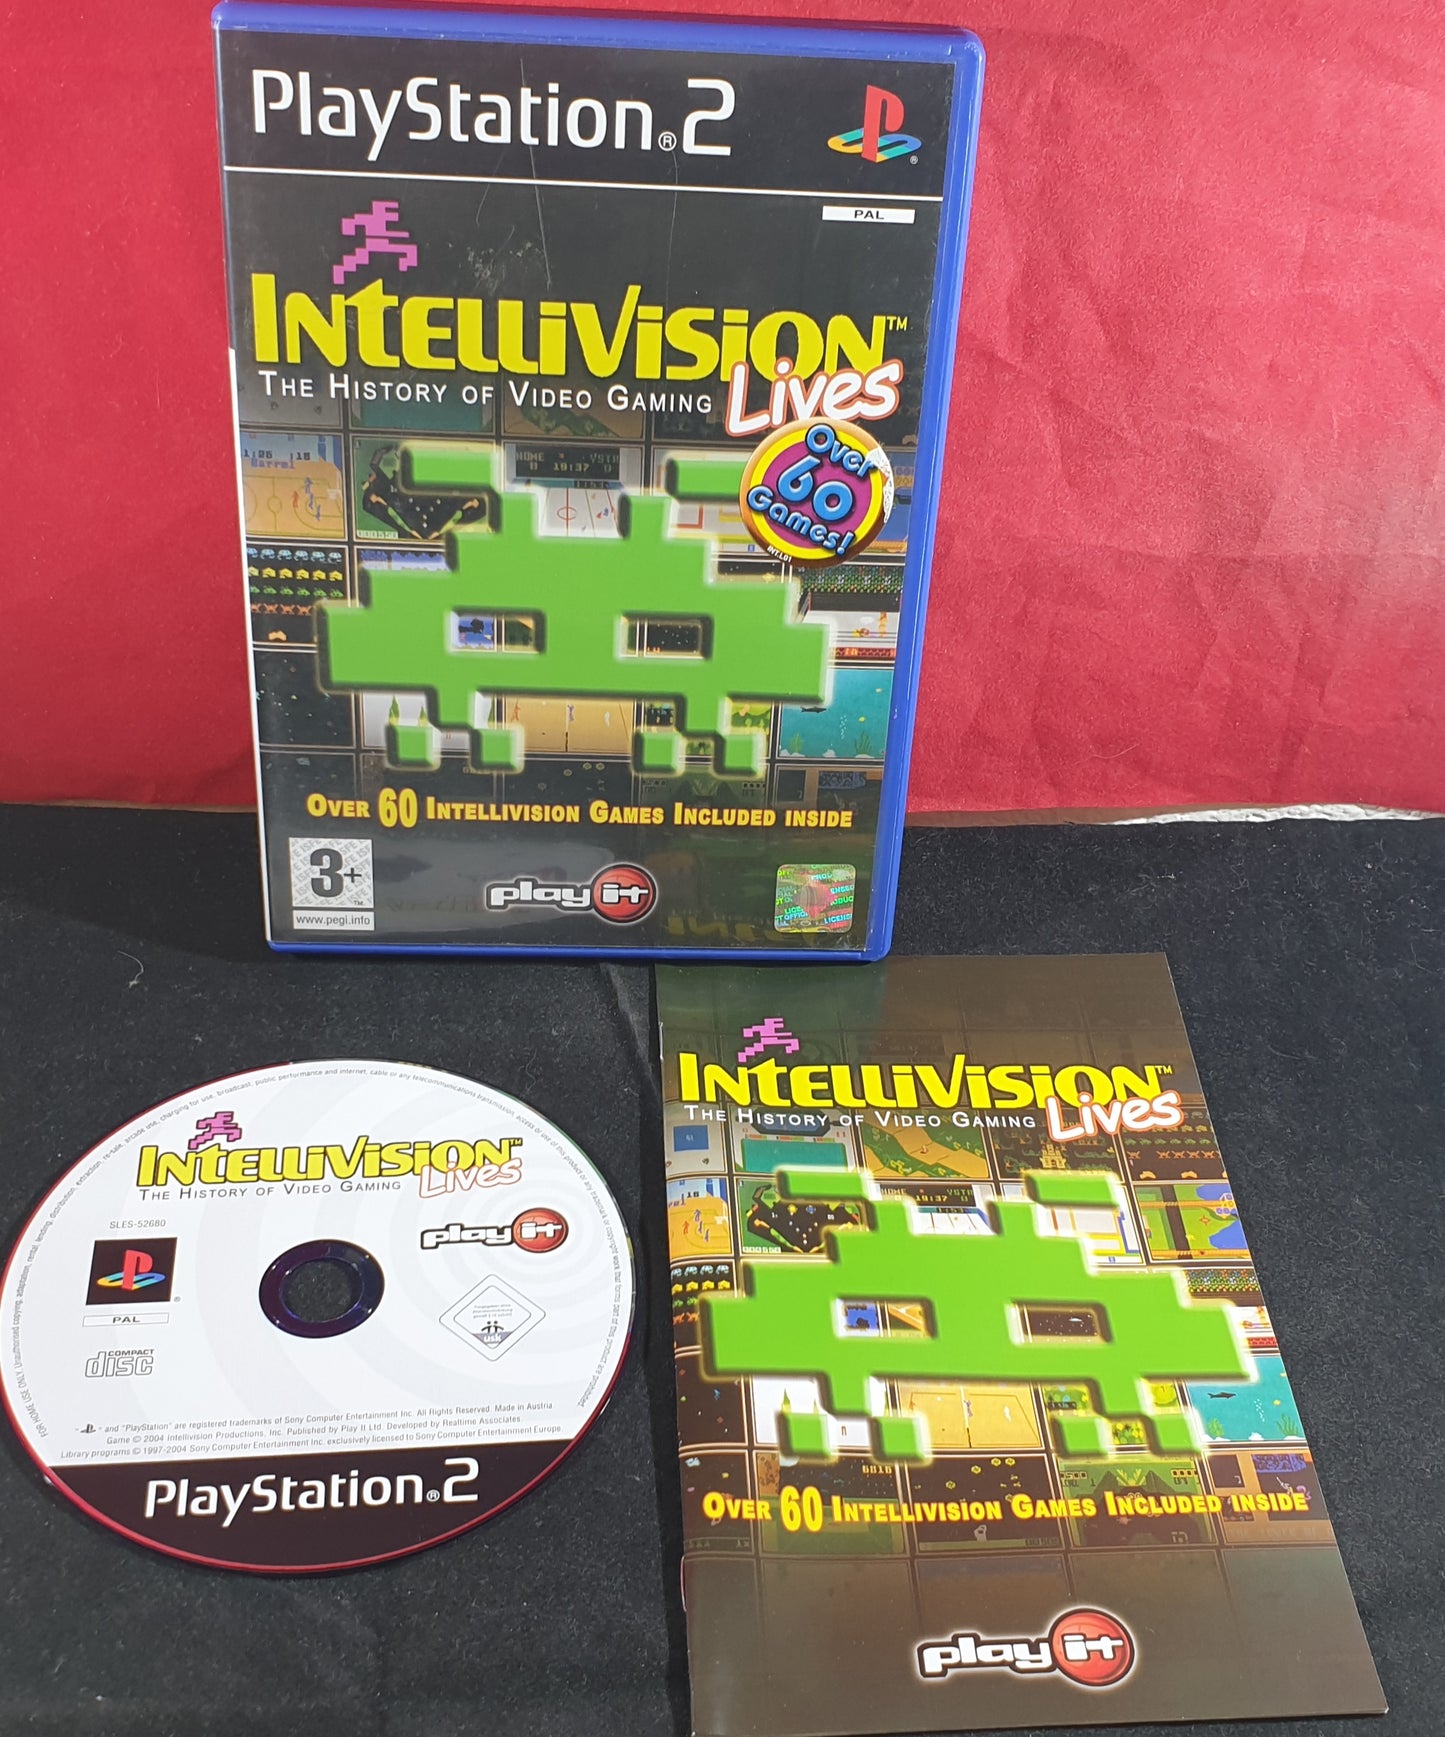 Intellivision Lives the History of Video Gaming Sony Playstation 2 (PS2) Game